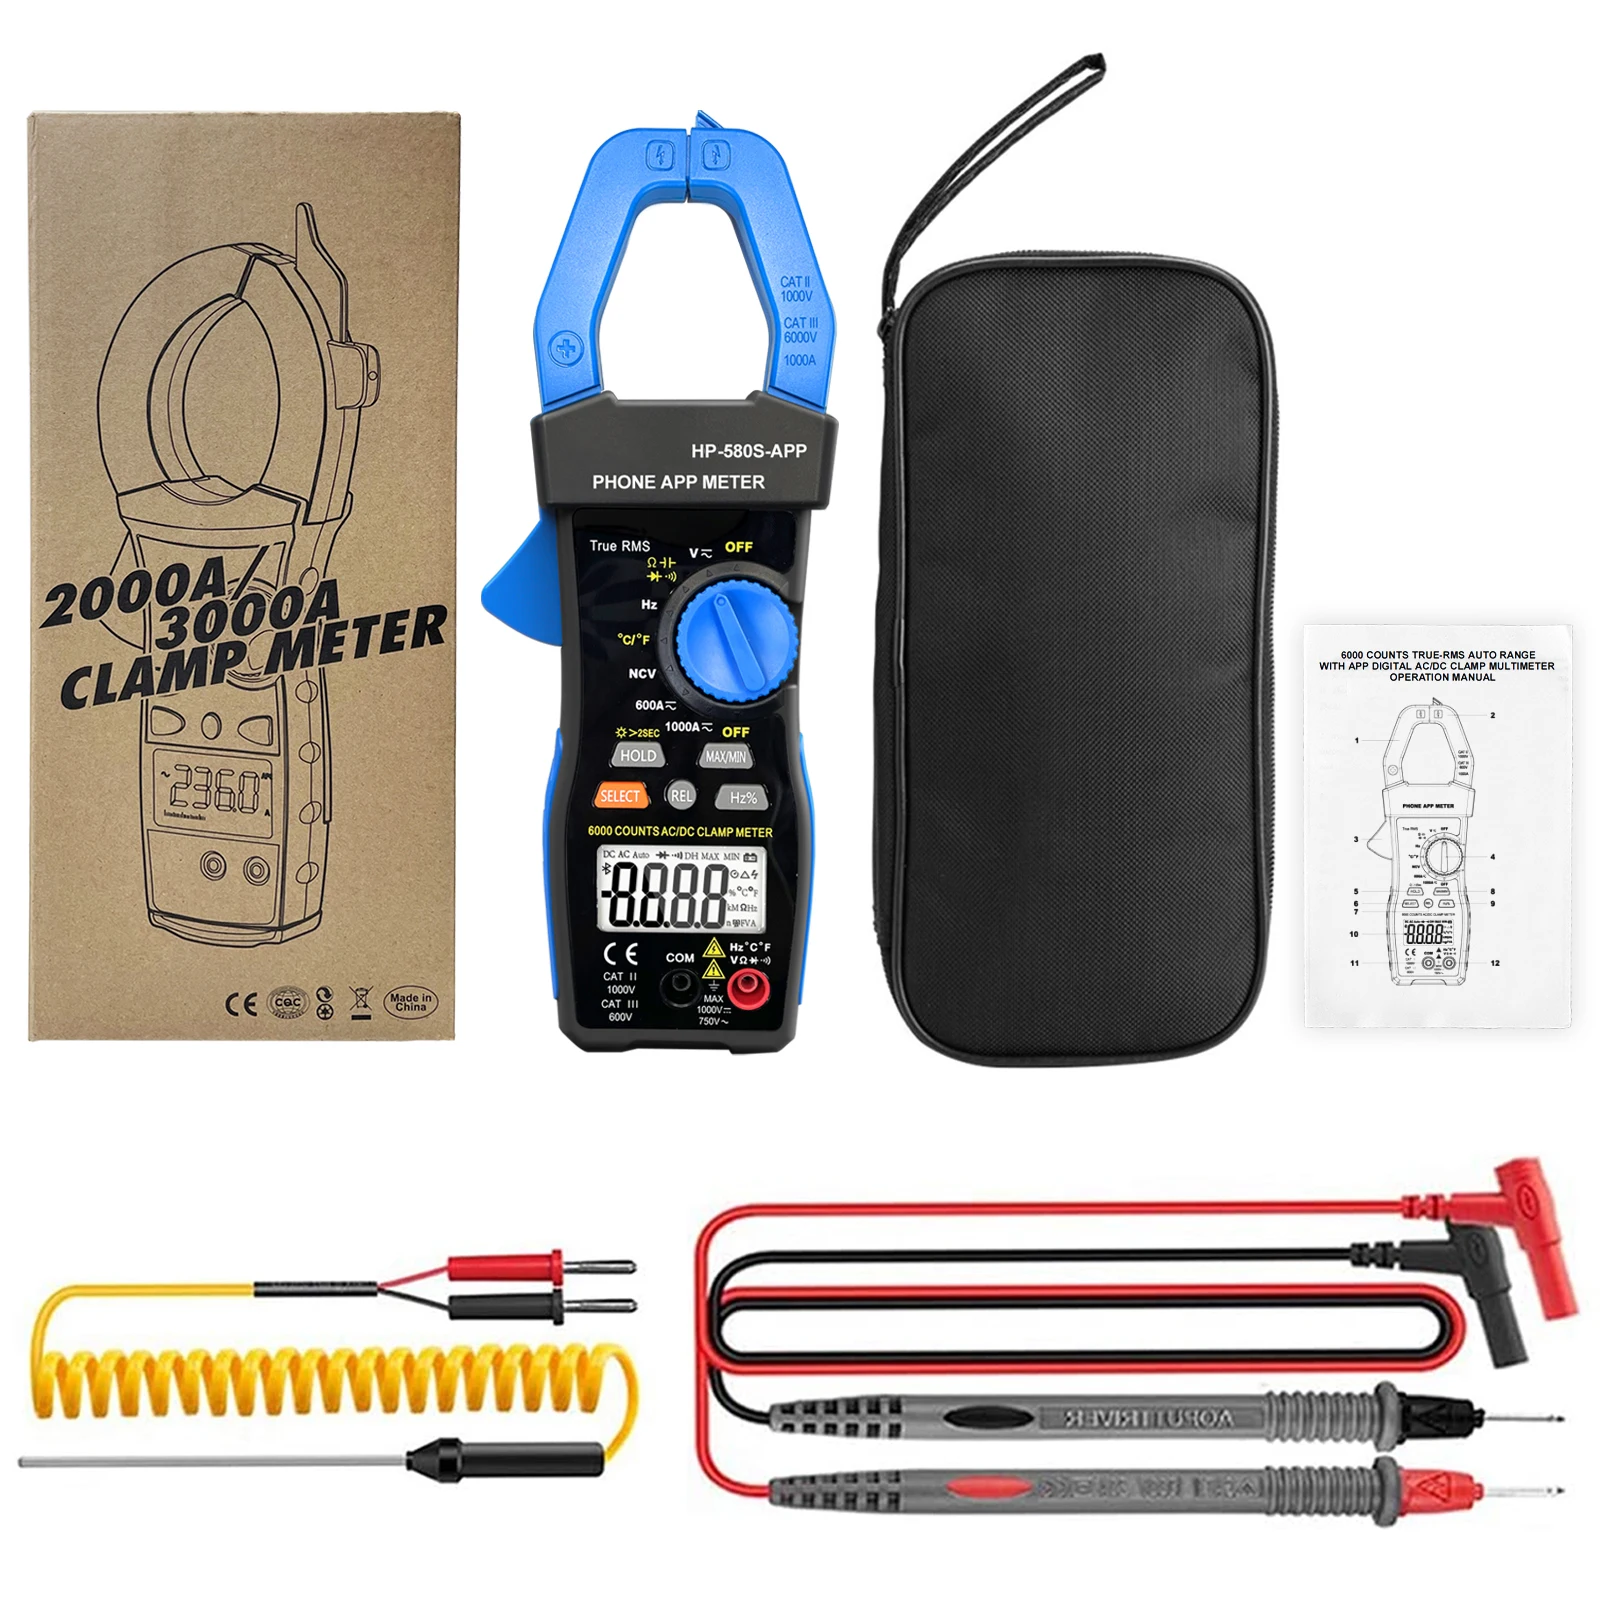 HOLDPEAK HP-580S-APP Clamp Meter 6000 Counts with Phone APP True RMS Effective Value,AC DC Tester LCD Back Light,NCV